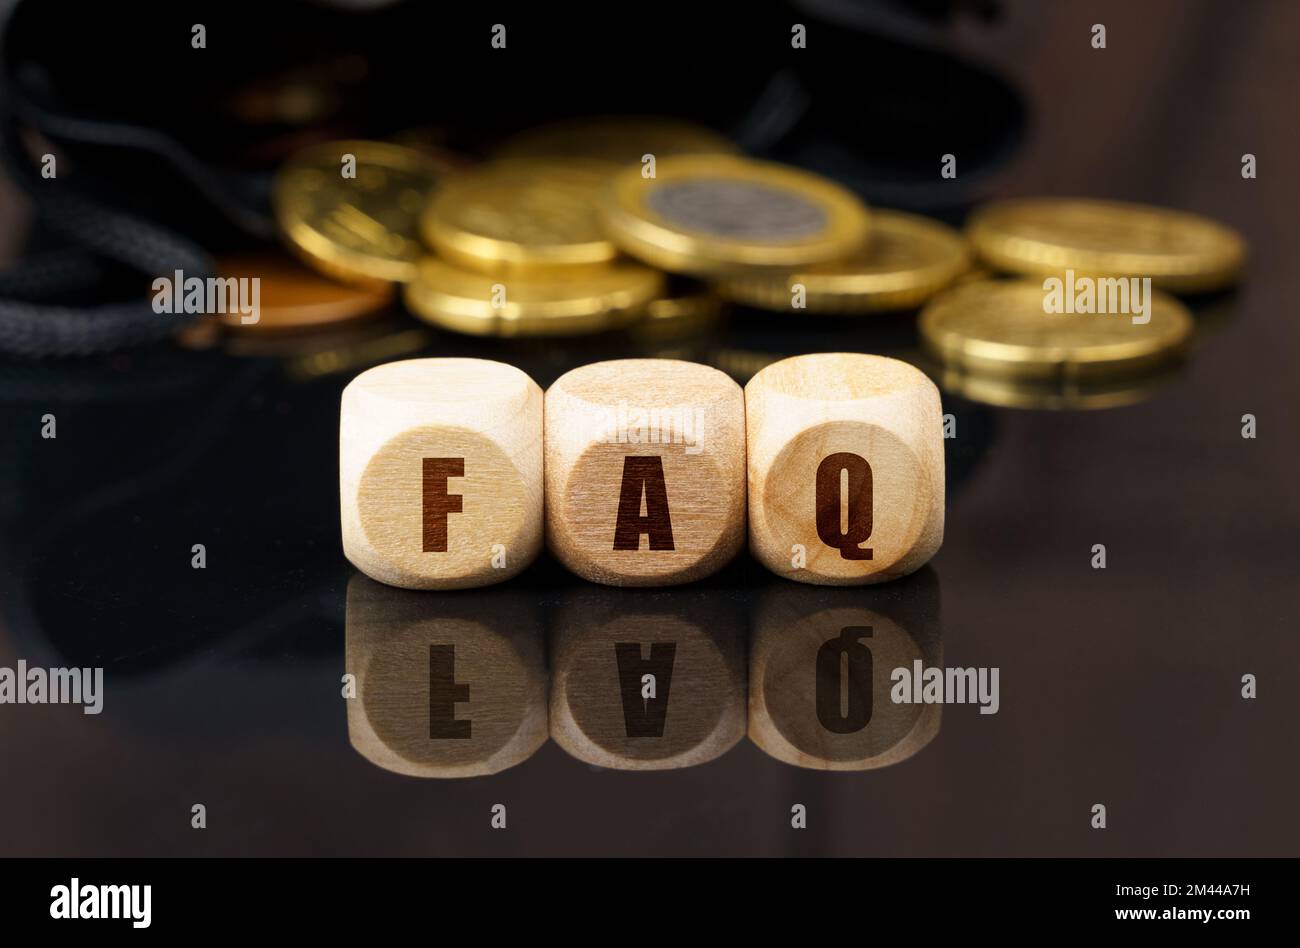 Business and economy concept. On a black reflective surface are coins and wooden cubes with the inscription - FAQ Stock Photo